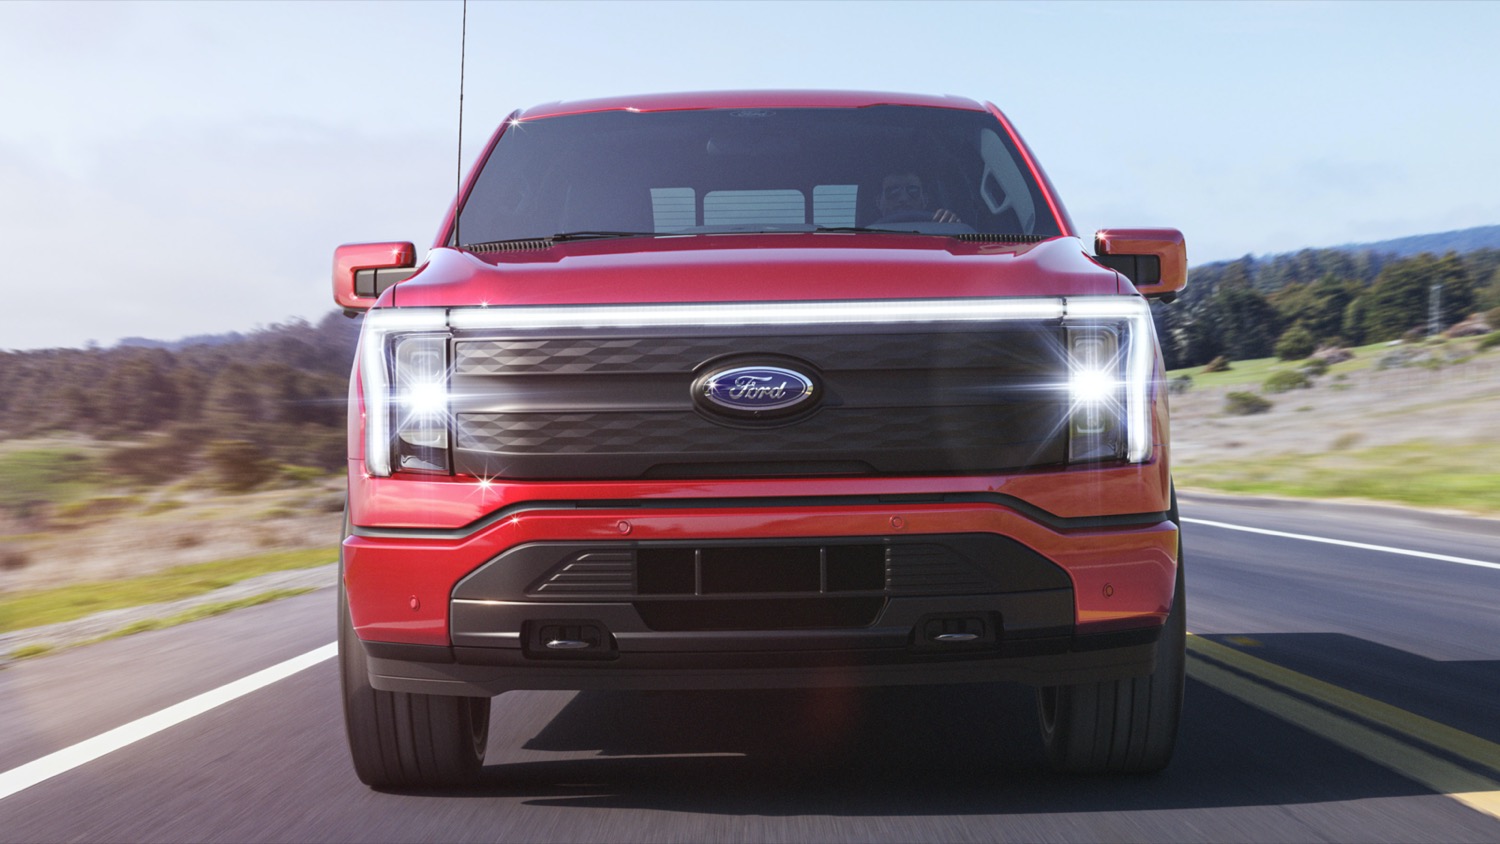 2022 Ford F-150 Lightning Production Will Be Limited In First Year